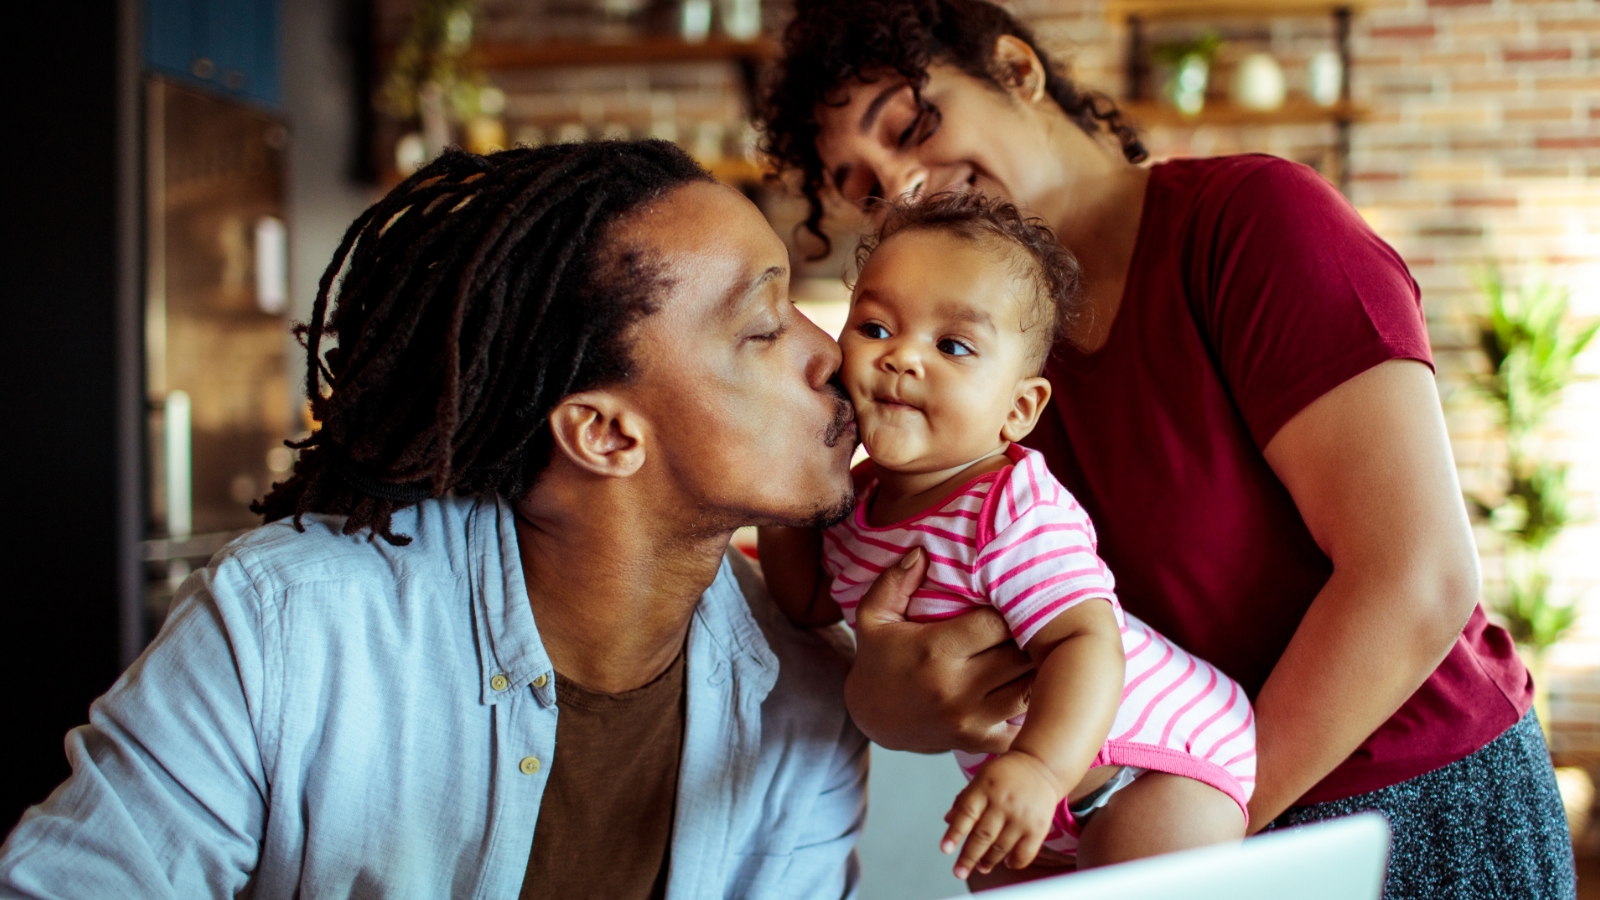 A caregiver (left) kisses a baby on the check while an additional caregiver (right) holds the baby in their arms.